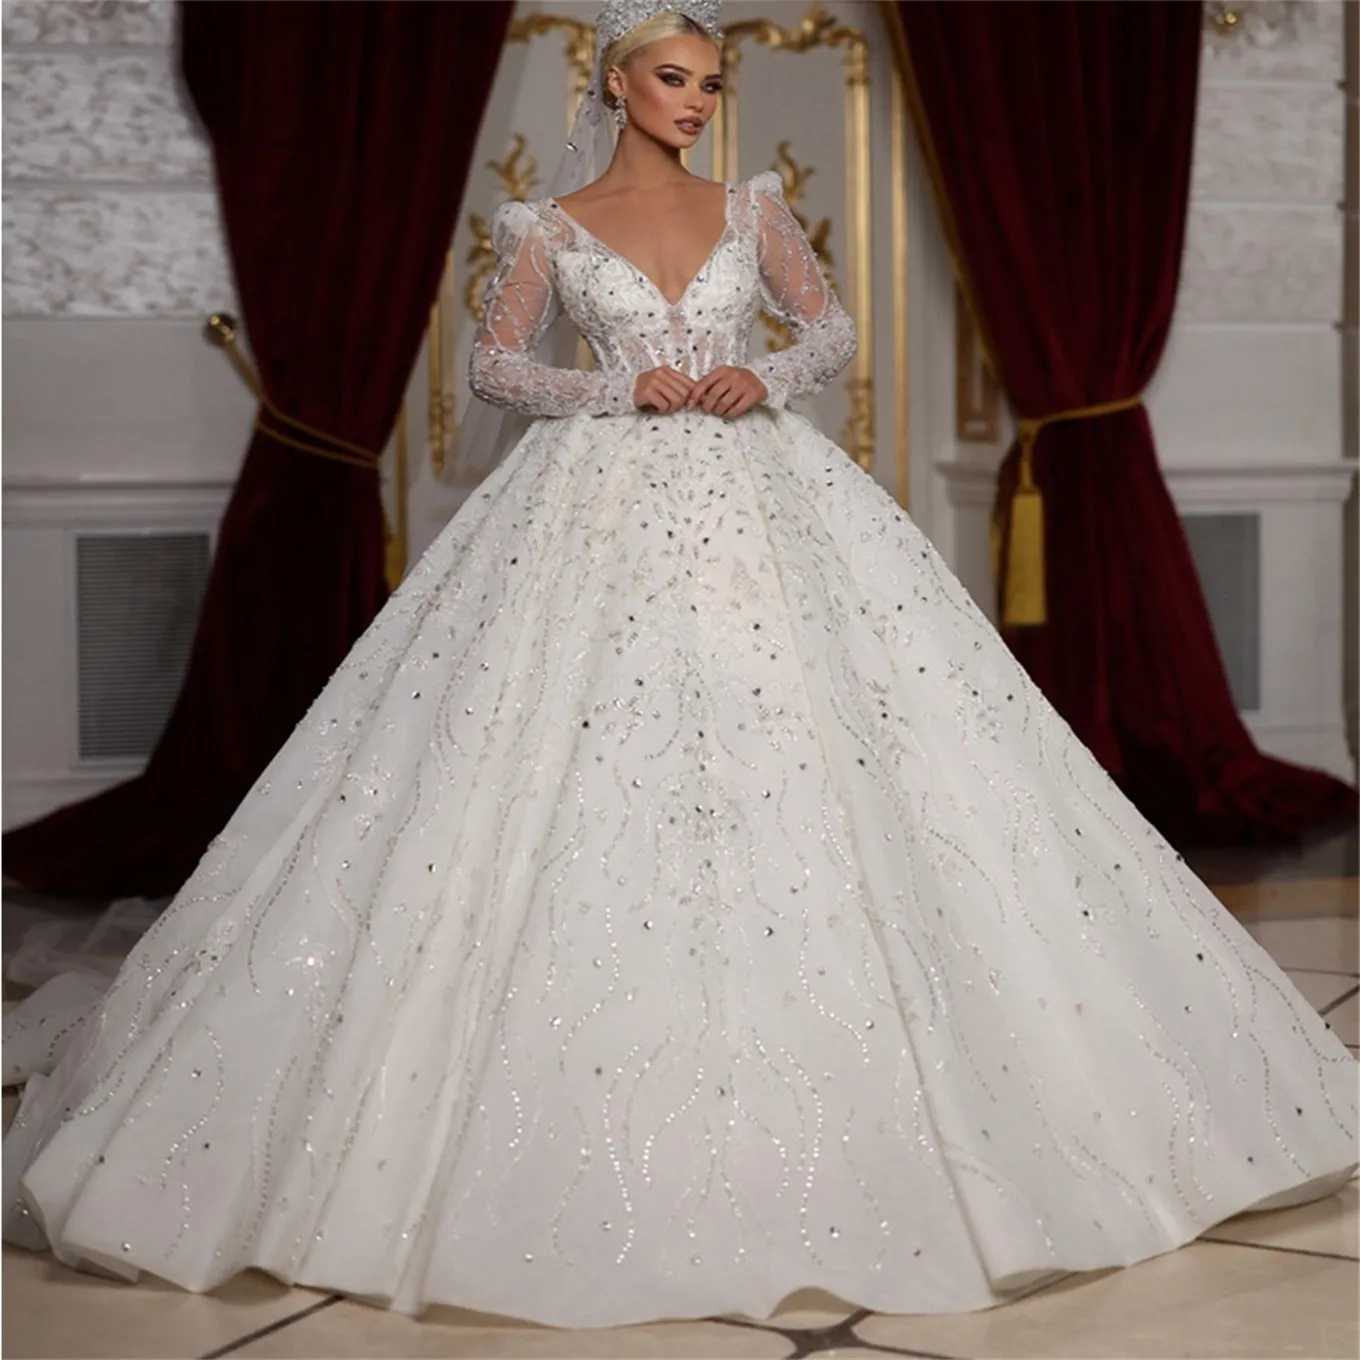 Luxury Ball Gown Wedding Dresses V-neck Transparent Long Sleeves Shining Applicants High Waist Lace Court Gown Custom Made Bridal Gown Vestidos De Novia